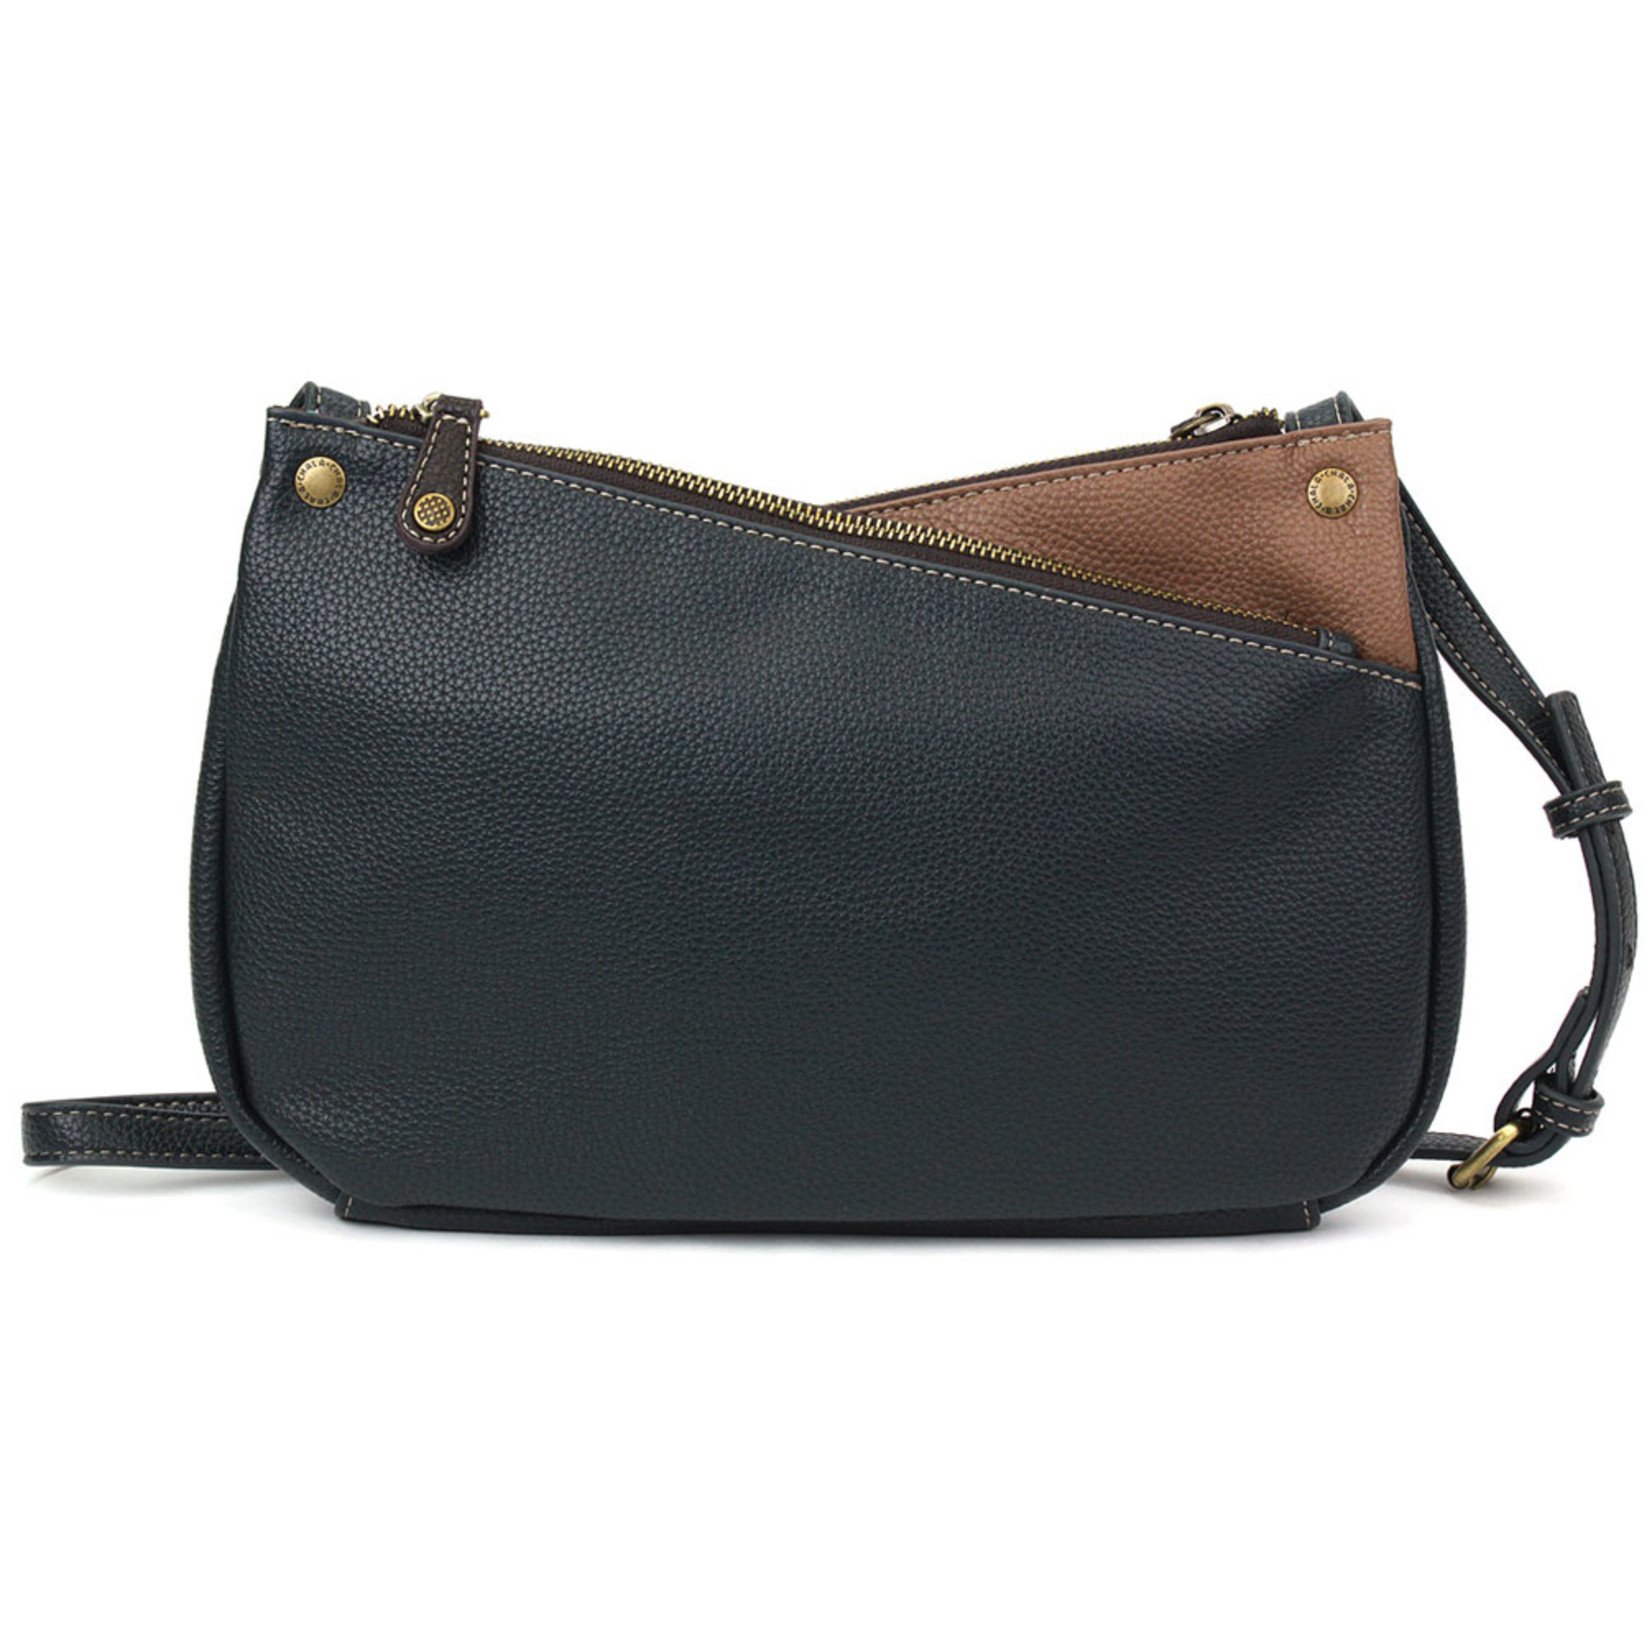 Chala 850 Wallet Xbody DF1 Dragonfly - The Mercantile at Springdale